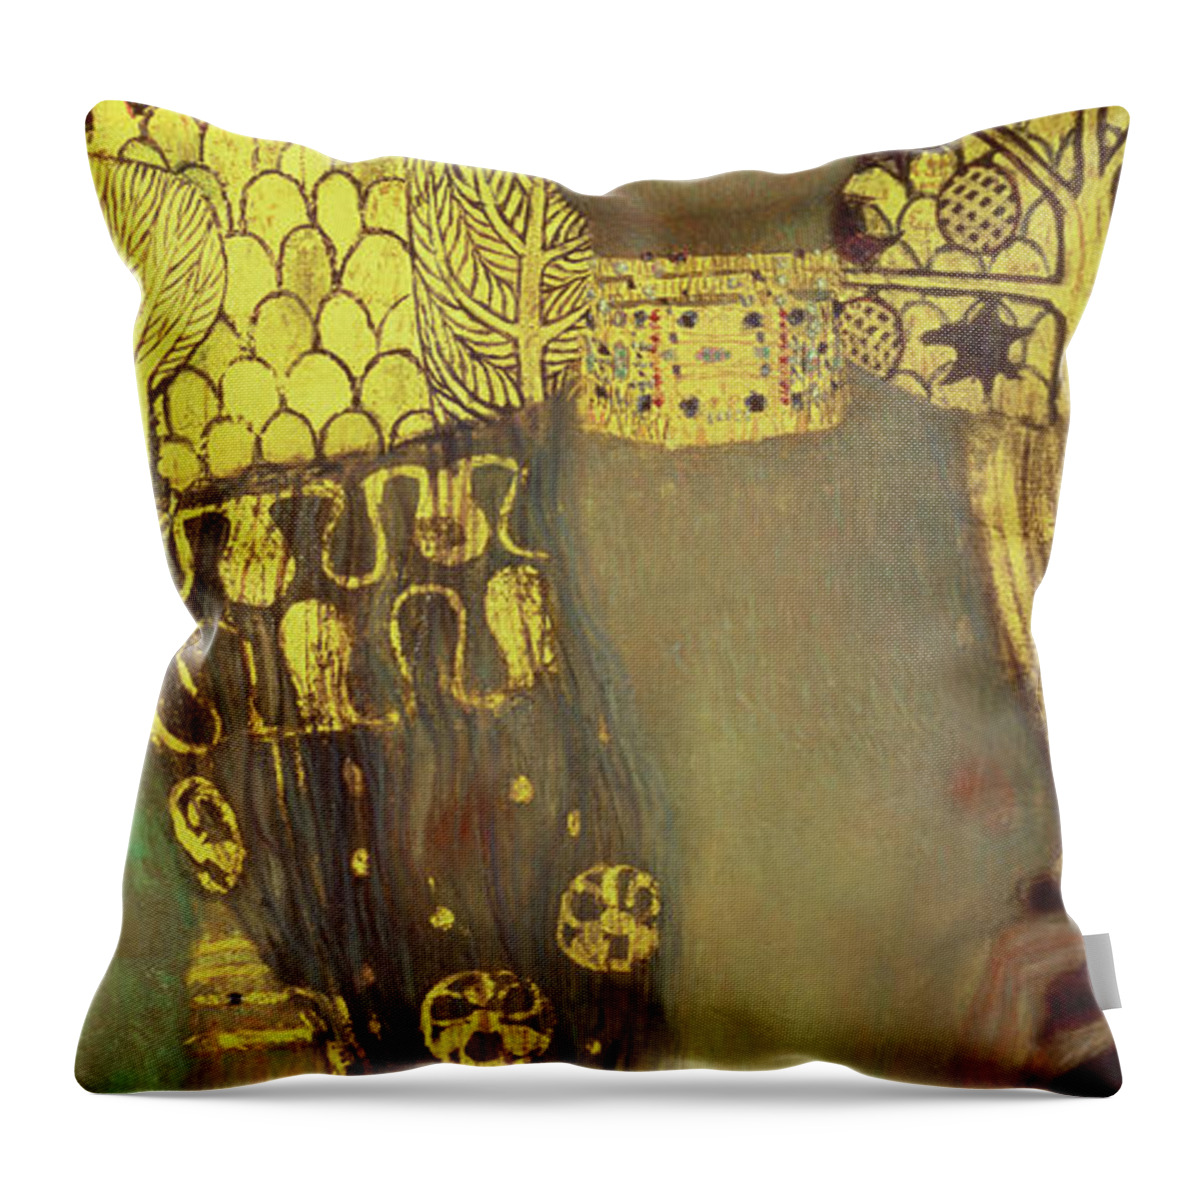 Judith Throw Pillow featuring the painting Judith by Klimt by Gustav Klimt